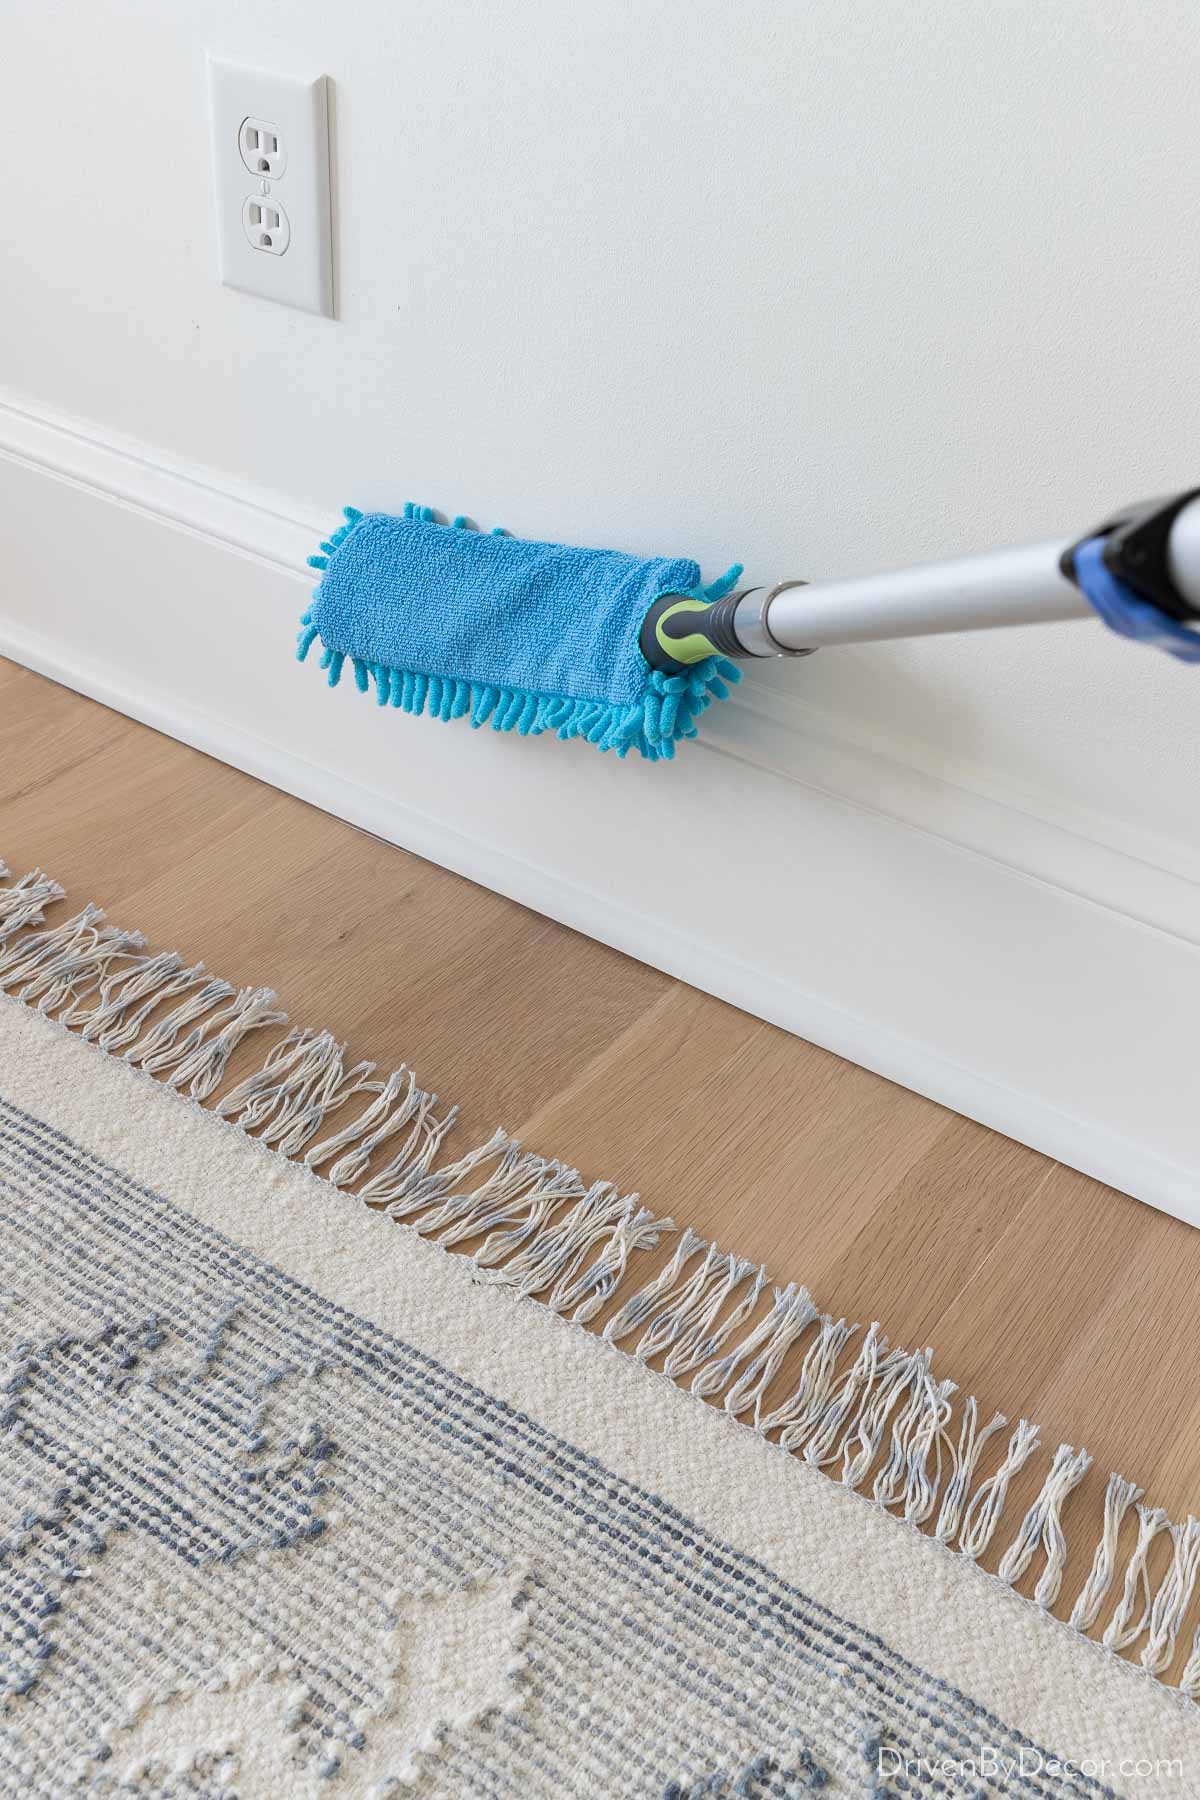 How to Clean Baseboards Without Bending Over?